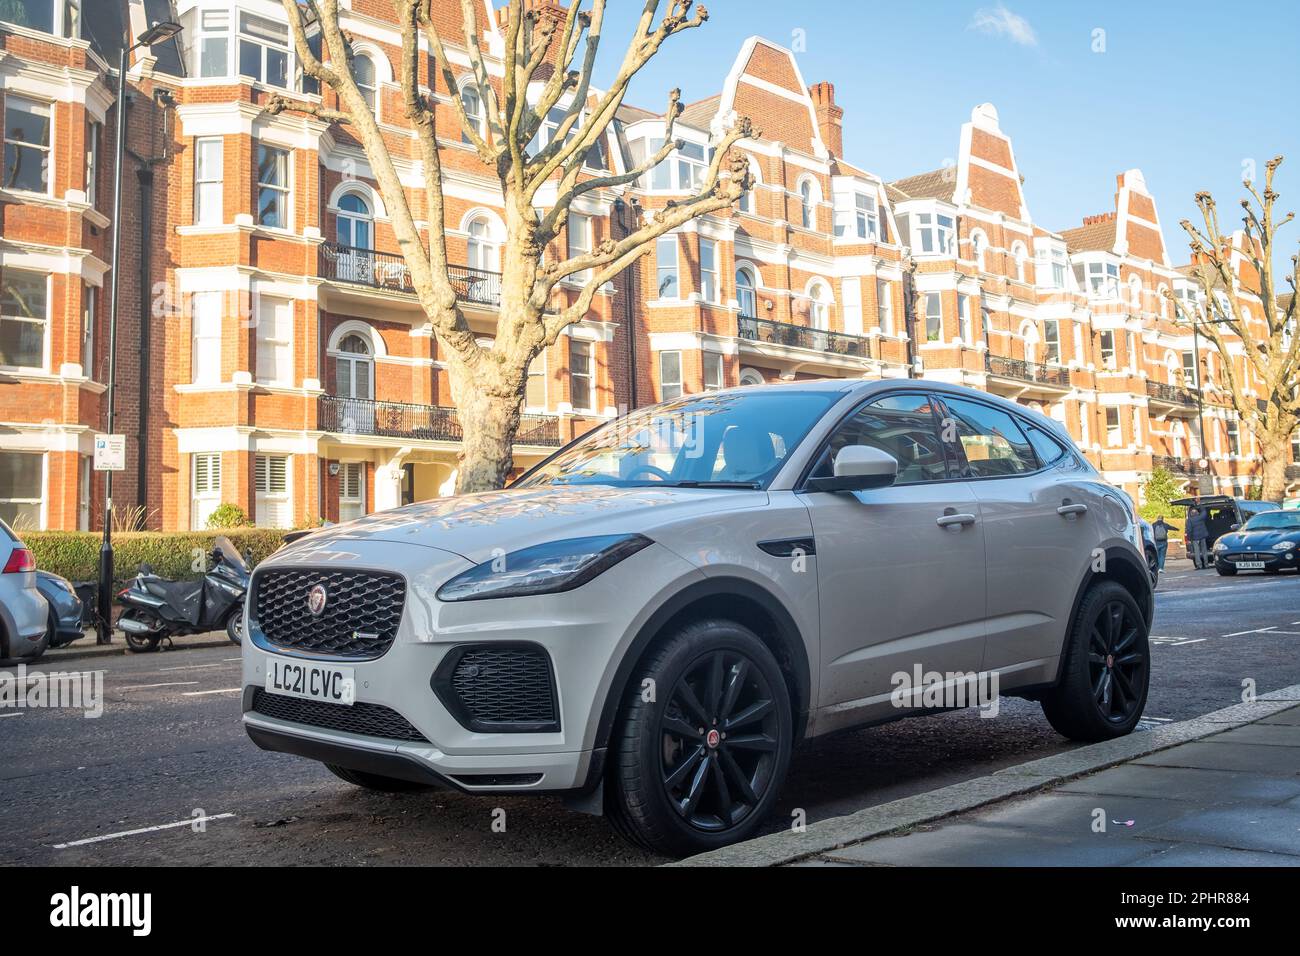 London- January 2023: Jaguar E Pace electric SUV car parked on residential street in Maida Vale Stock Photo